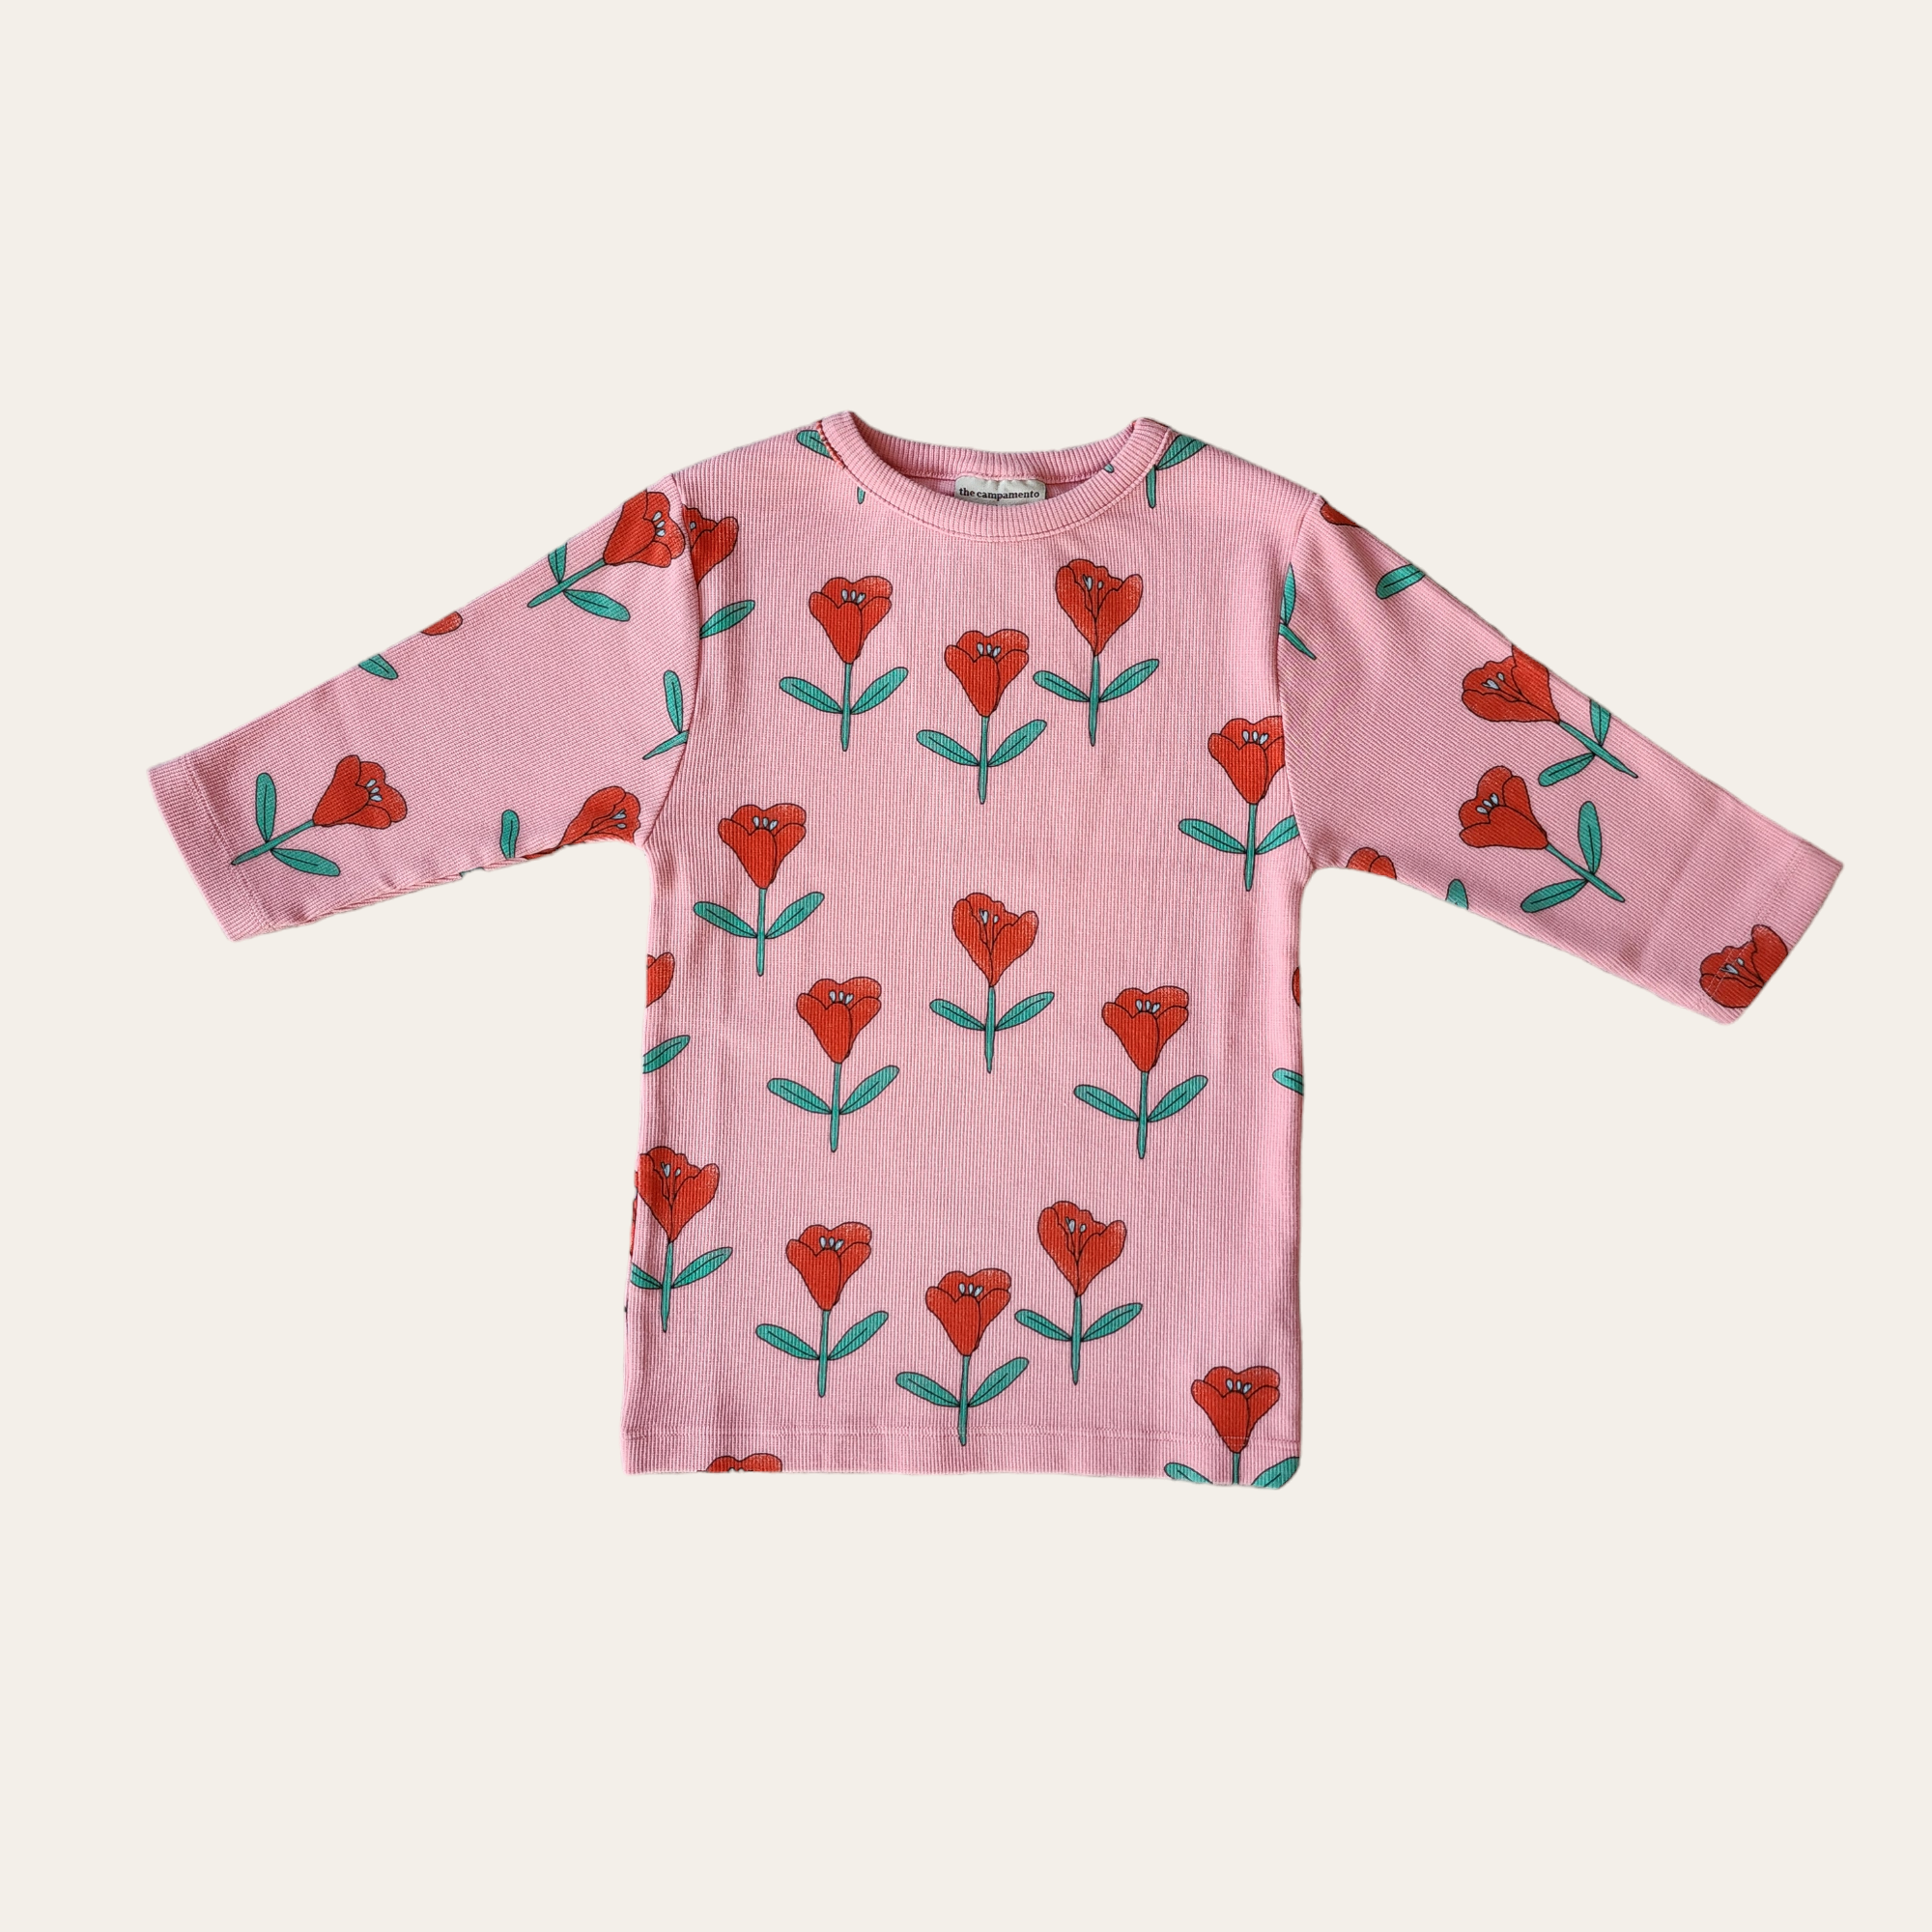 The Campamento Pink Tulips T-Shirt